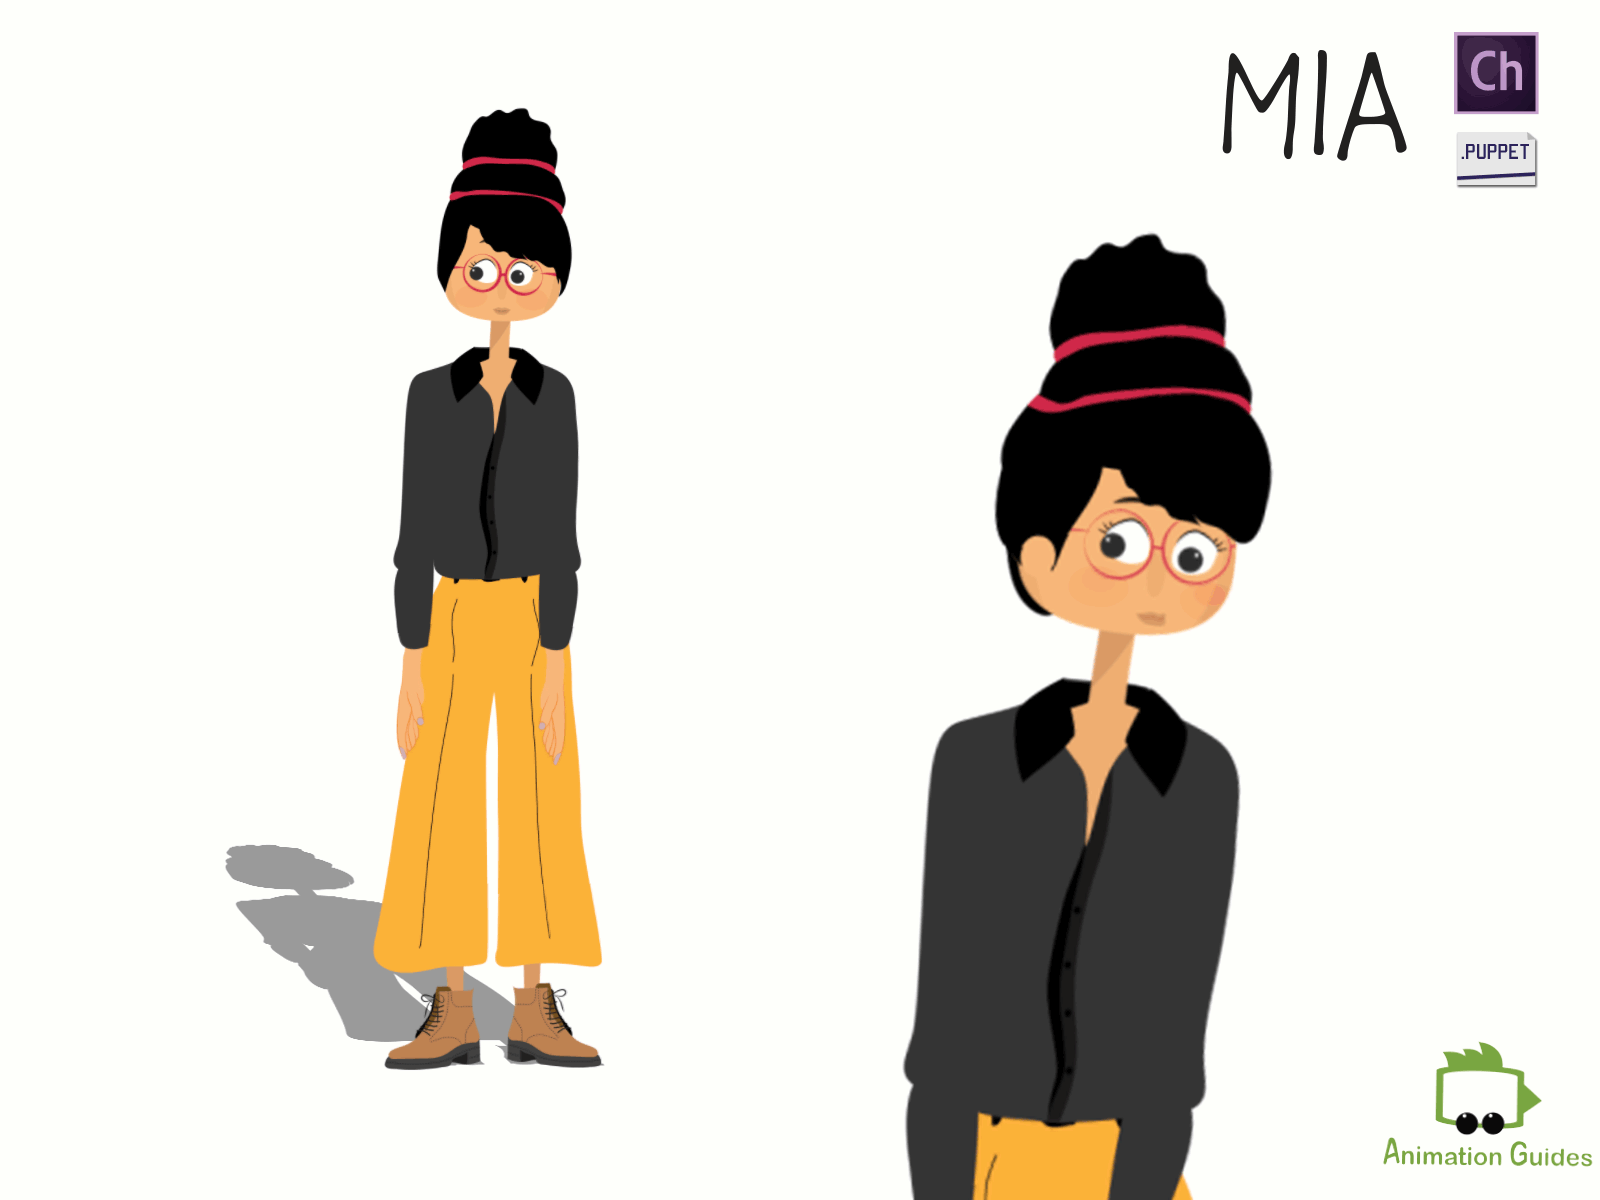 a fifth look at Mia